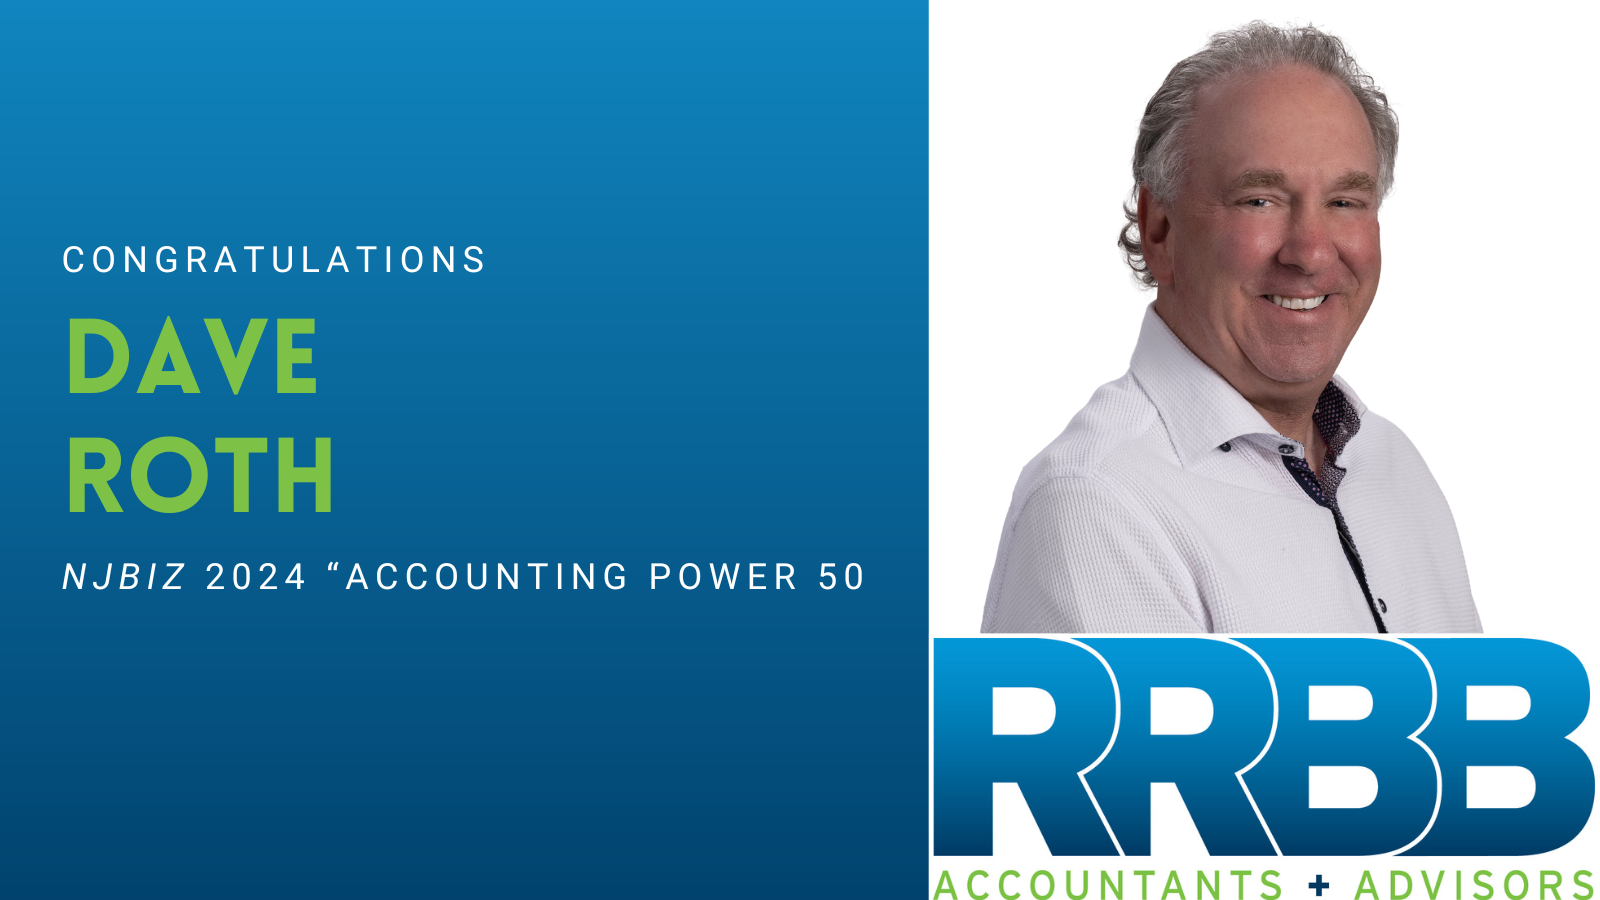 Dave Roth Listed in 2024 NJBIZ “Accounting Power 50” Image